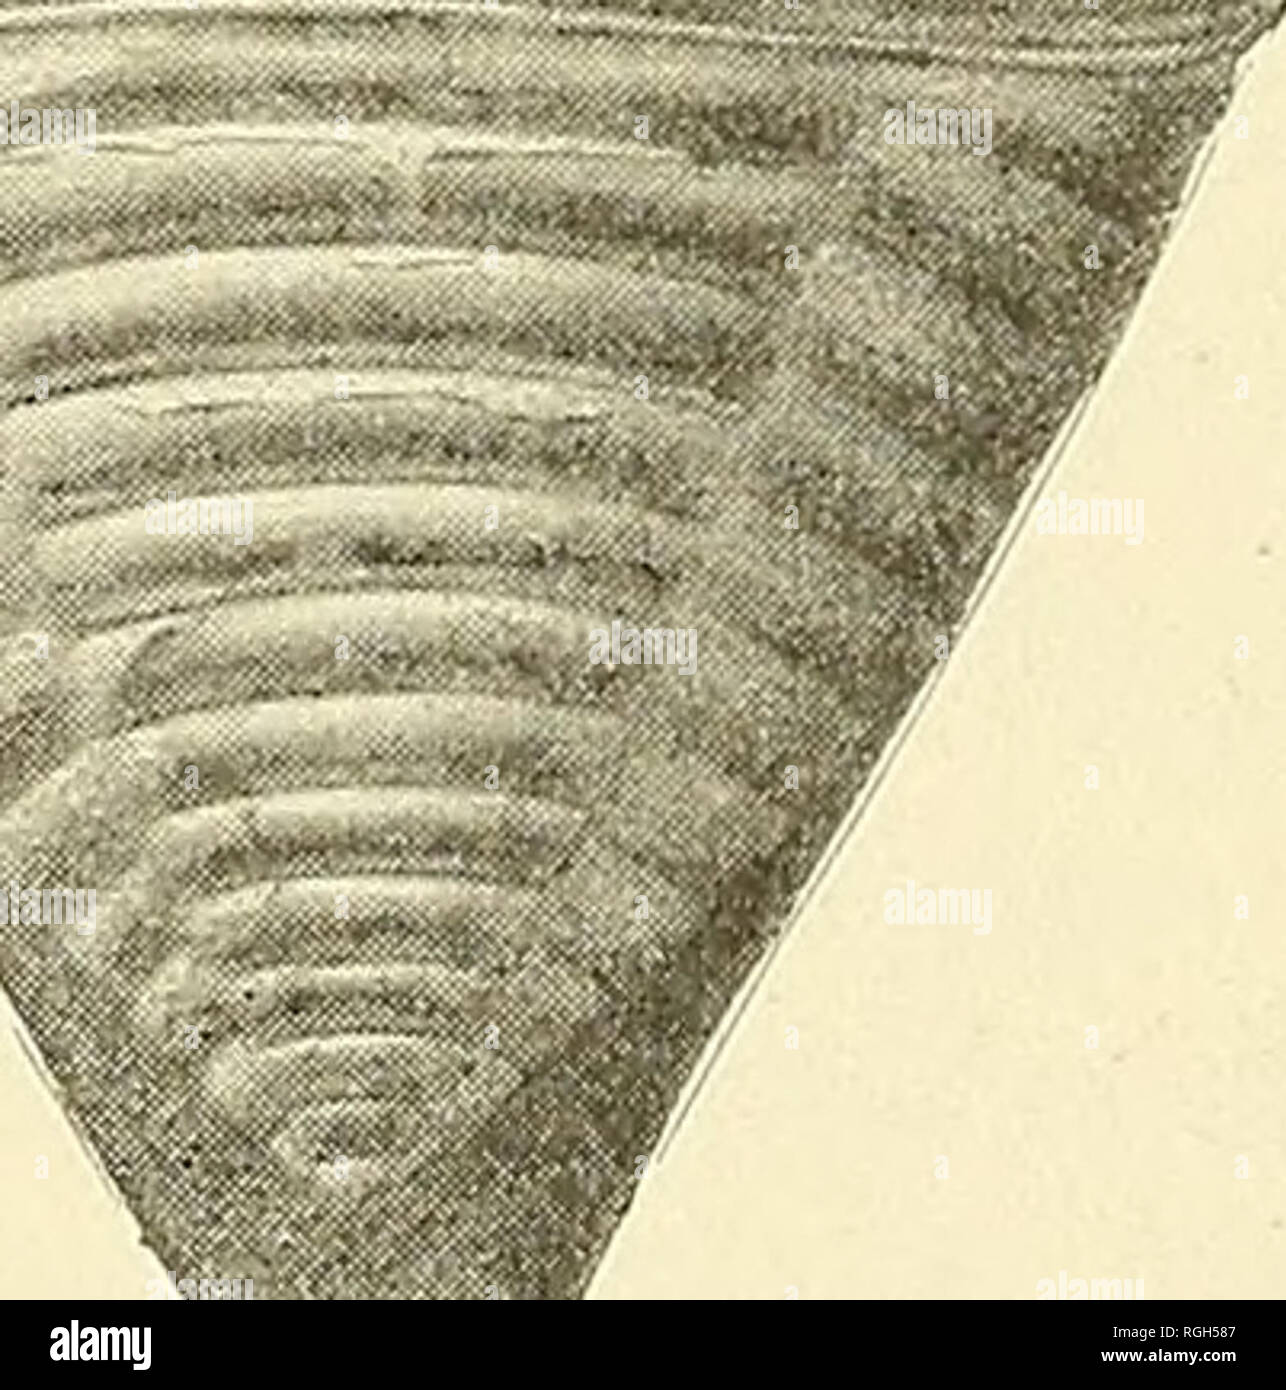 . Bulletin of the Buffalo Society of Natural Sciences. Natural history; Science. NEW YORK STATE MUSEUM ium ending acutely, faintly trilobate, and strongly ringed both on the axial and lateral portions; granulose surface. IfeiS***2. Fig. 153 Homalonotus delphinocephalus, % natural size Found rarely in the lower Rochester shale at Niagara, but com- mon in the upper shales. Also found at Lockport and elsewhere (Hall). Genus illaenus Dalman [Ety.: IXXabu), to squint] (1828. Ueber die Palaeaden, p. 51) Cephalon and pygidium of about the same size, large and convex, smooth, semicircular in outline,  Stock Photo